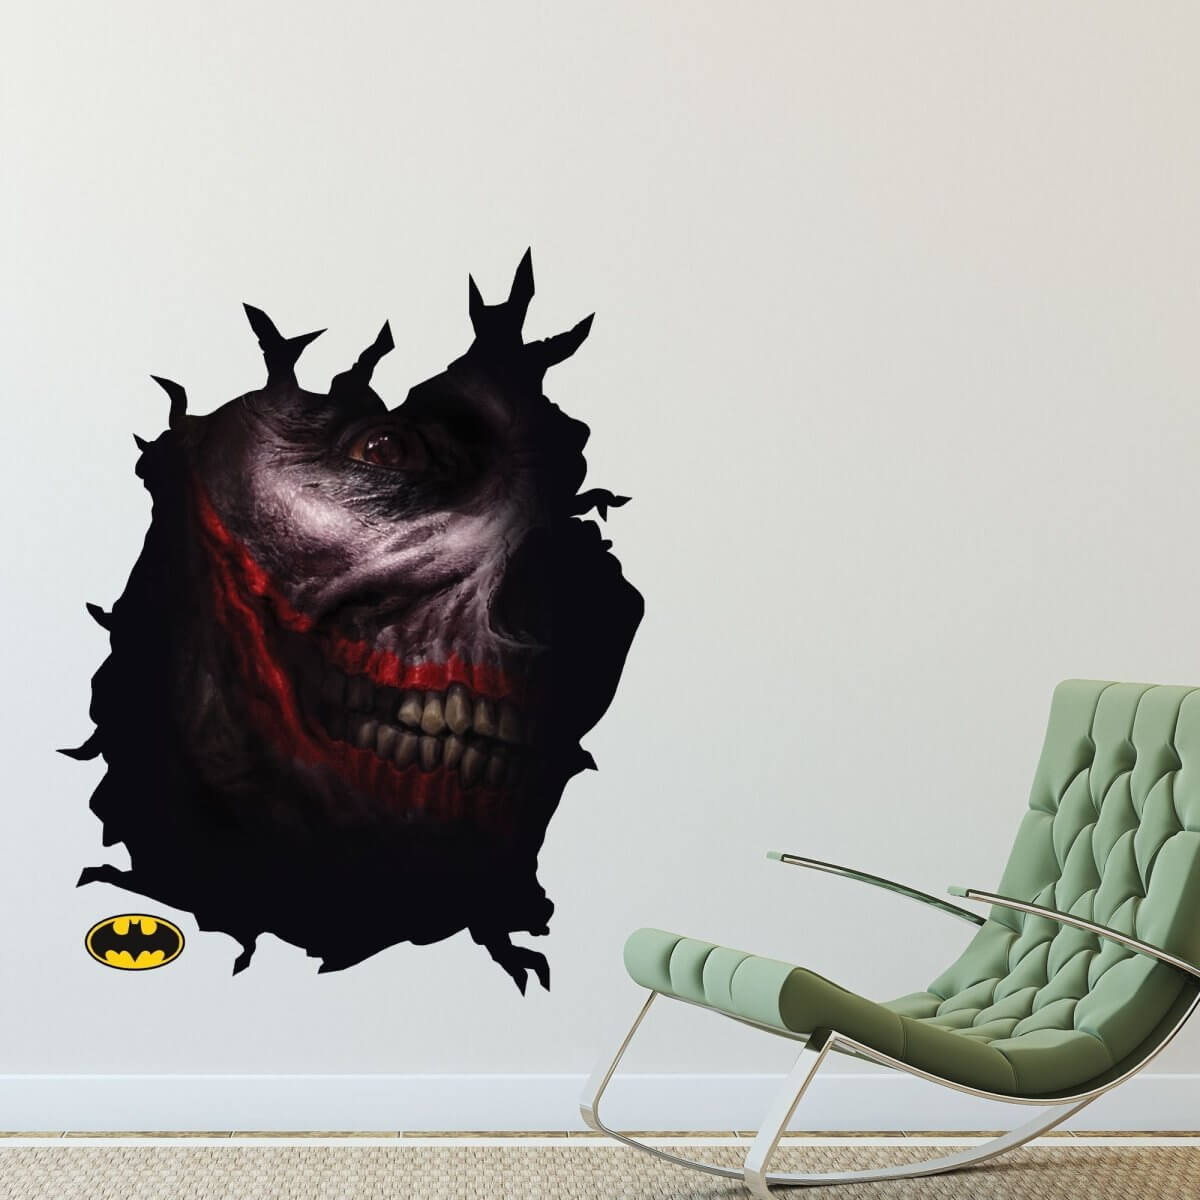 Kismet Decals Batman: Damned #3 Comic Cover Series Licensed Wall Sticker - Easy DIY Home & Room Decor Wall Art - Kismet Decals